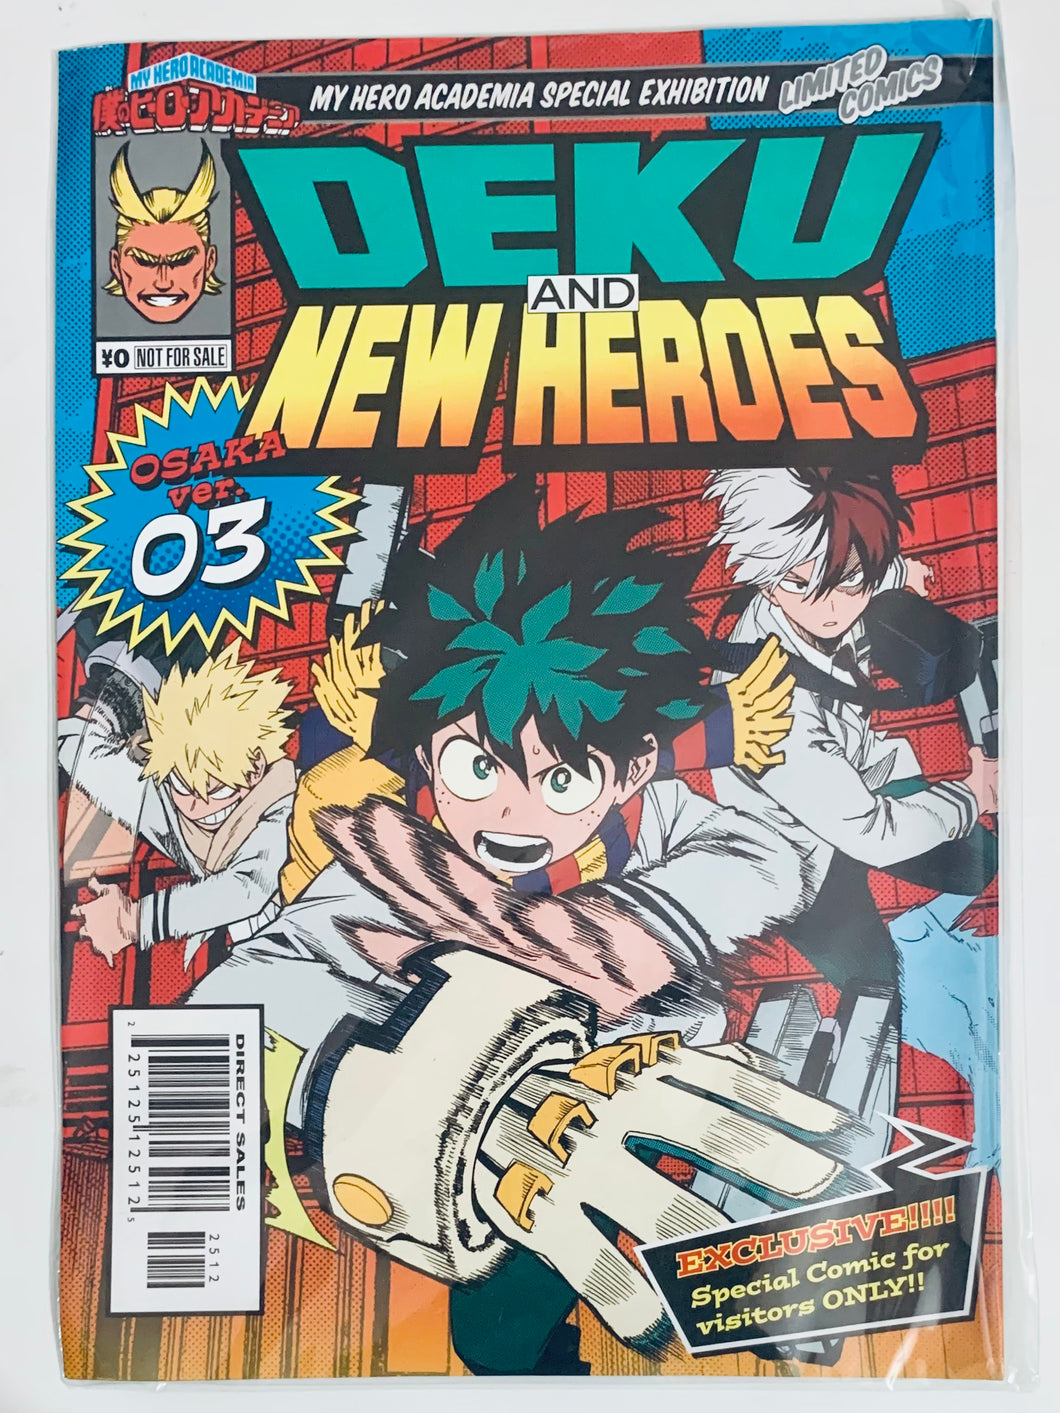 My Hero Academia - Deku and New Heroes - Special Exhibition Osaka Venue Visitor Benefits Leaflet vol.3